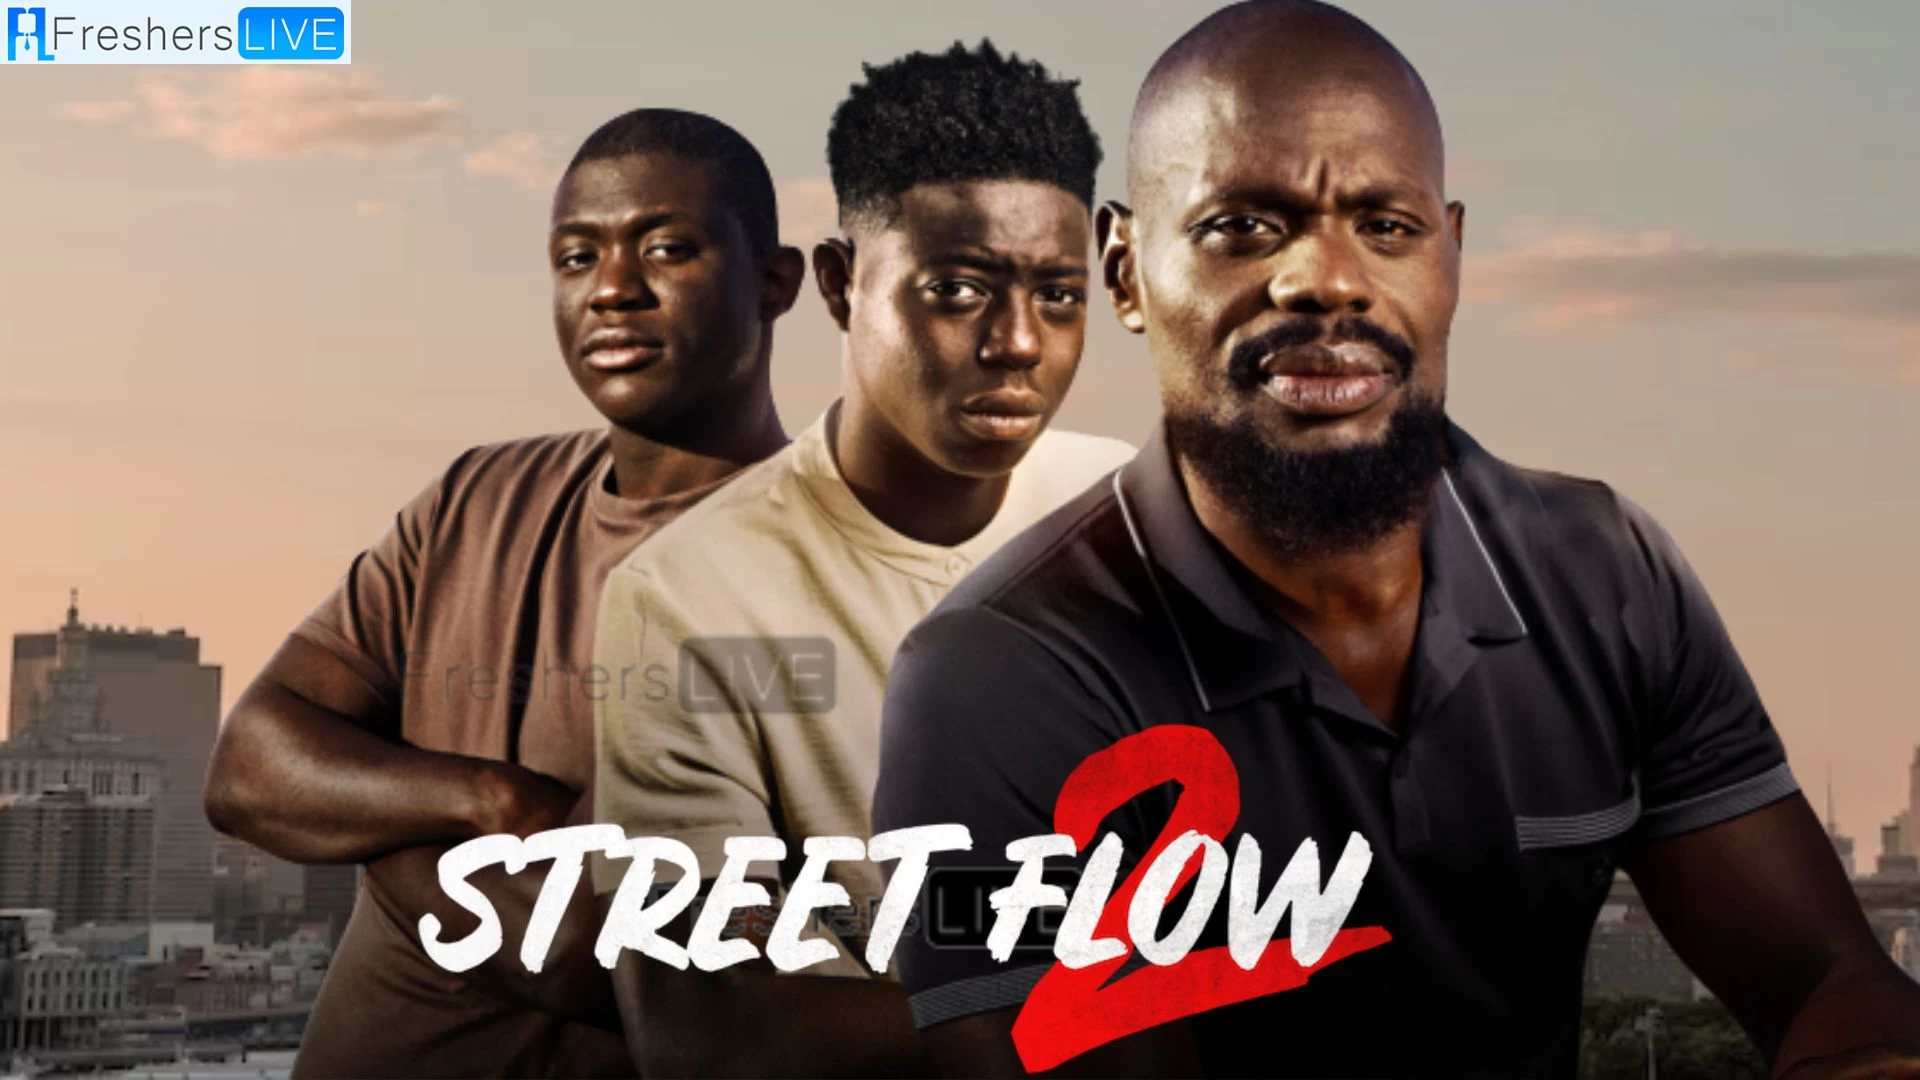 Street Flow 2 Ending Explained, Release Date, Plot, Review, Cast, Where to Watch, and More